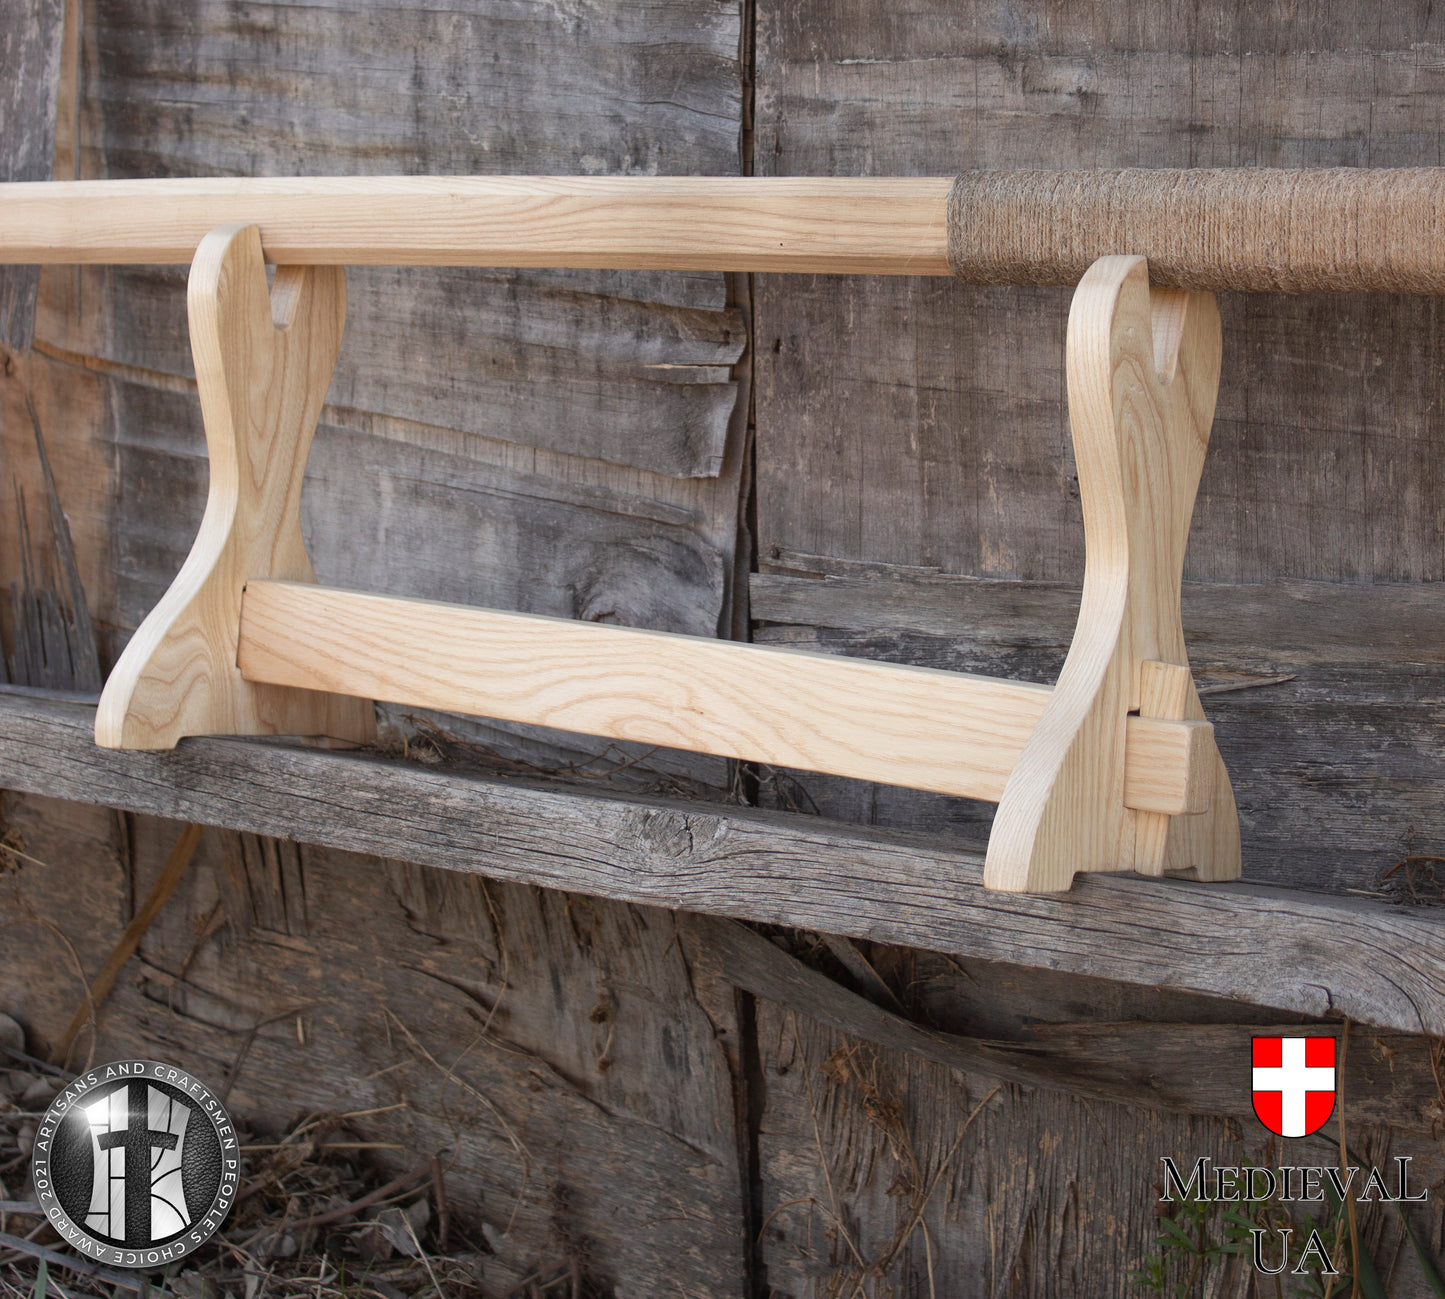 Wooden medieval sword stand